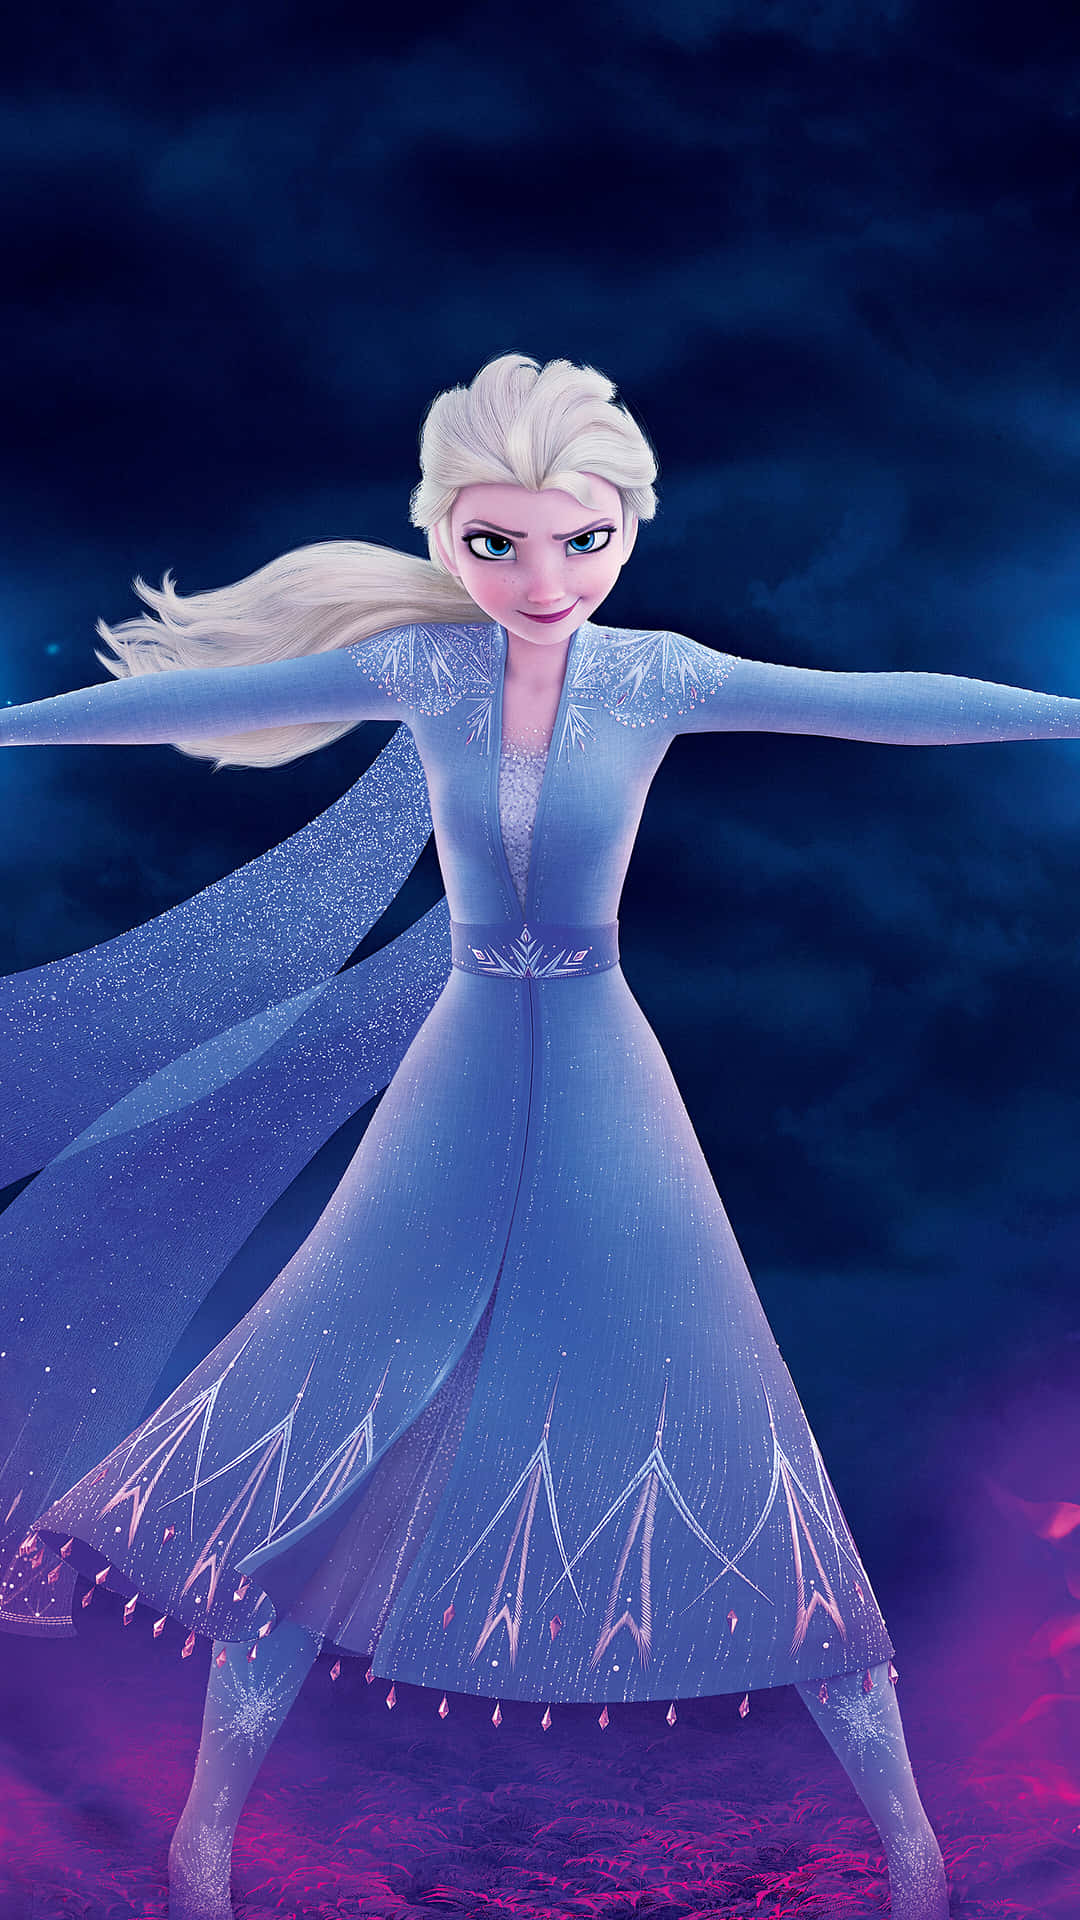 "Elsa Dazzles with Her Incredible Ice Powers"